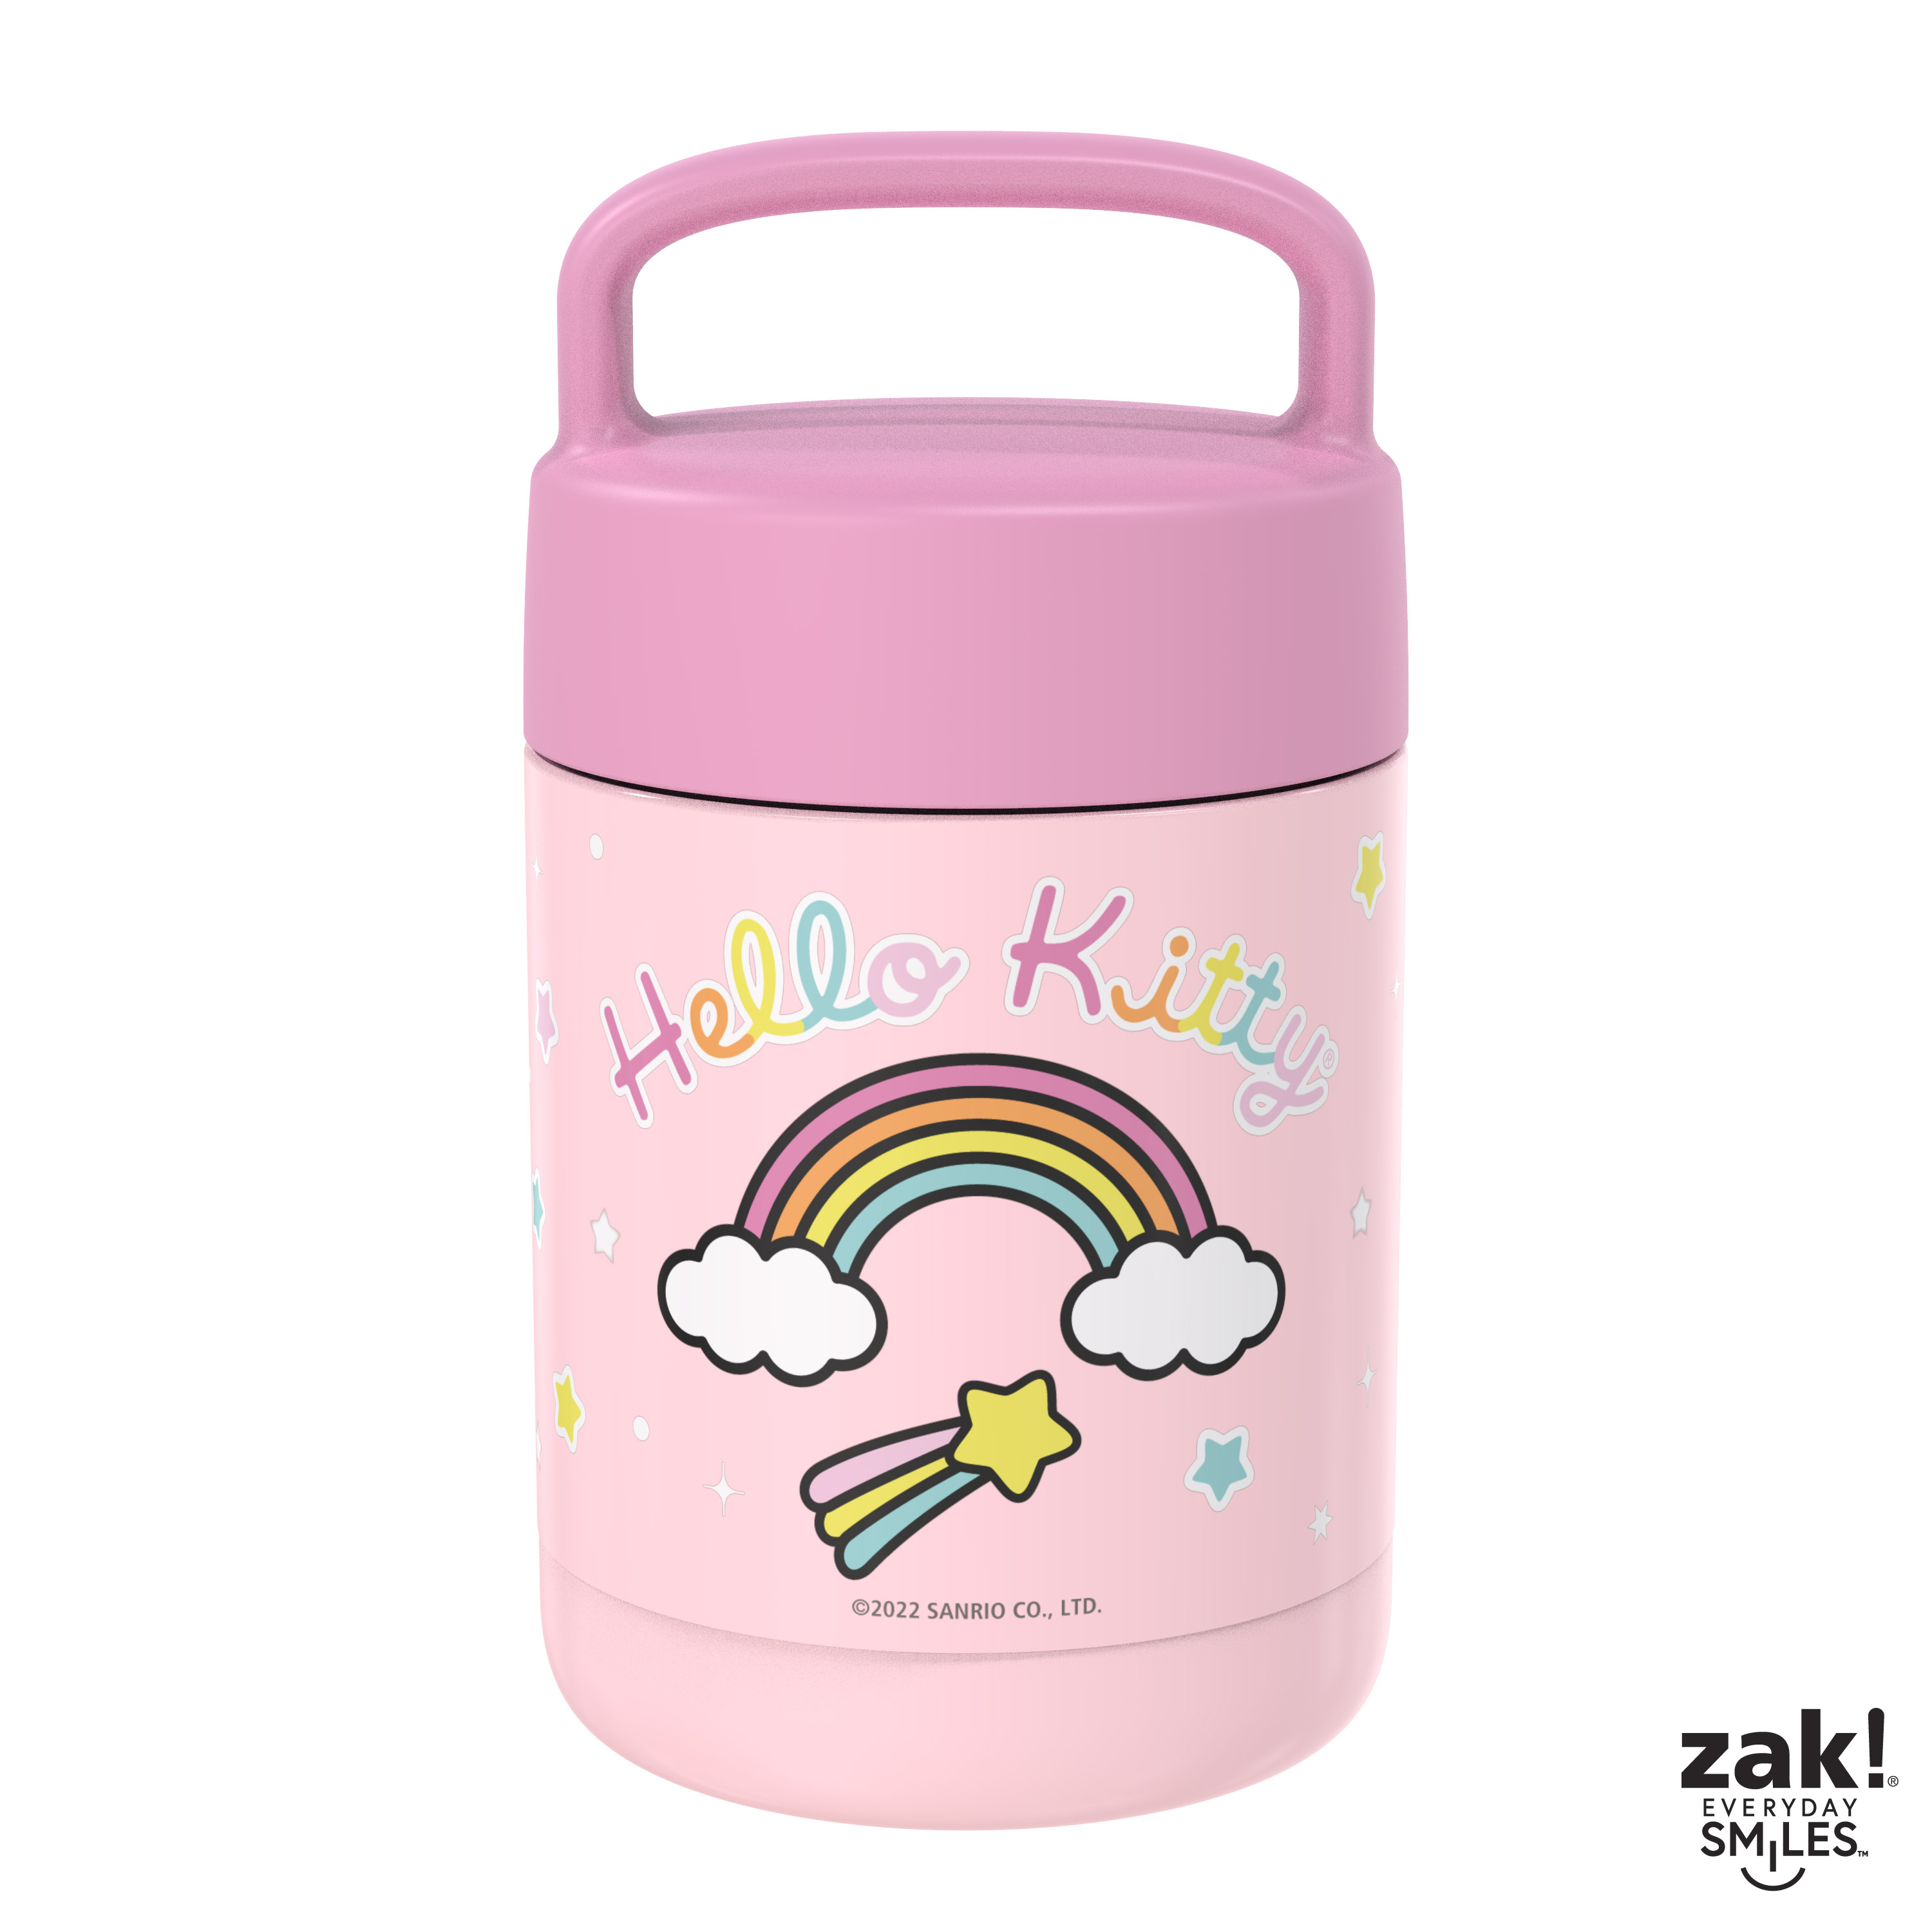 Sanrio Reusable Vacuum Insulated Stainless Steel Food Container, Hello Kitty slideshow image 2